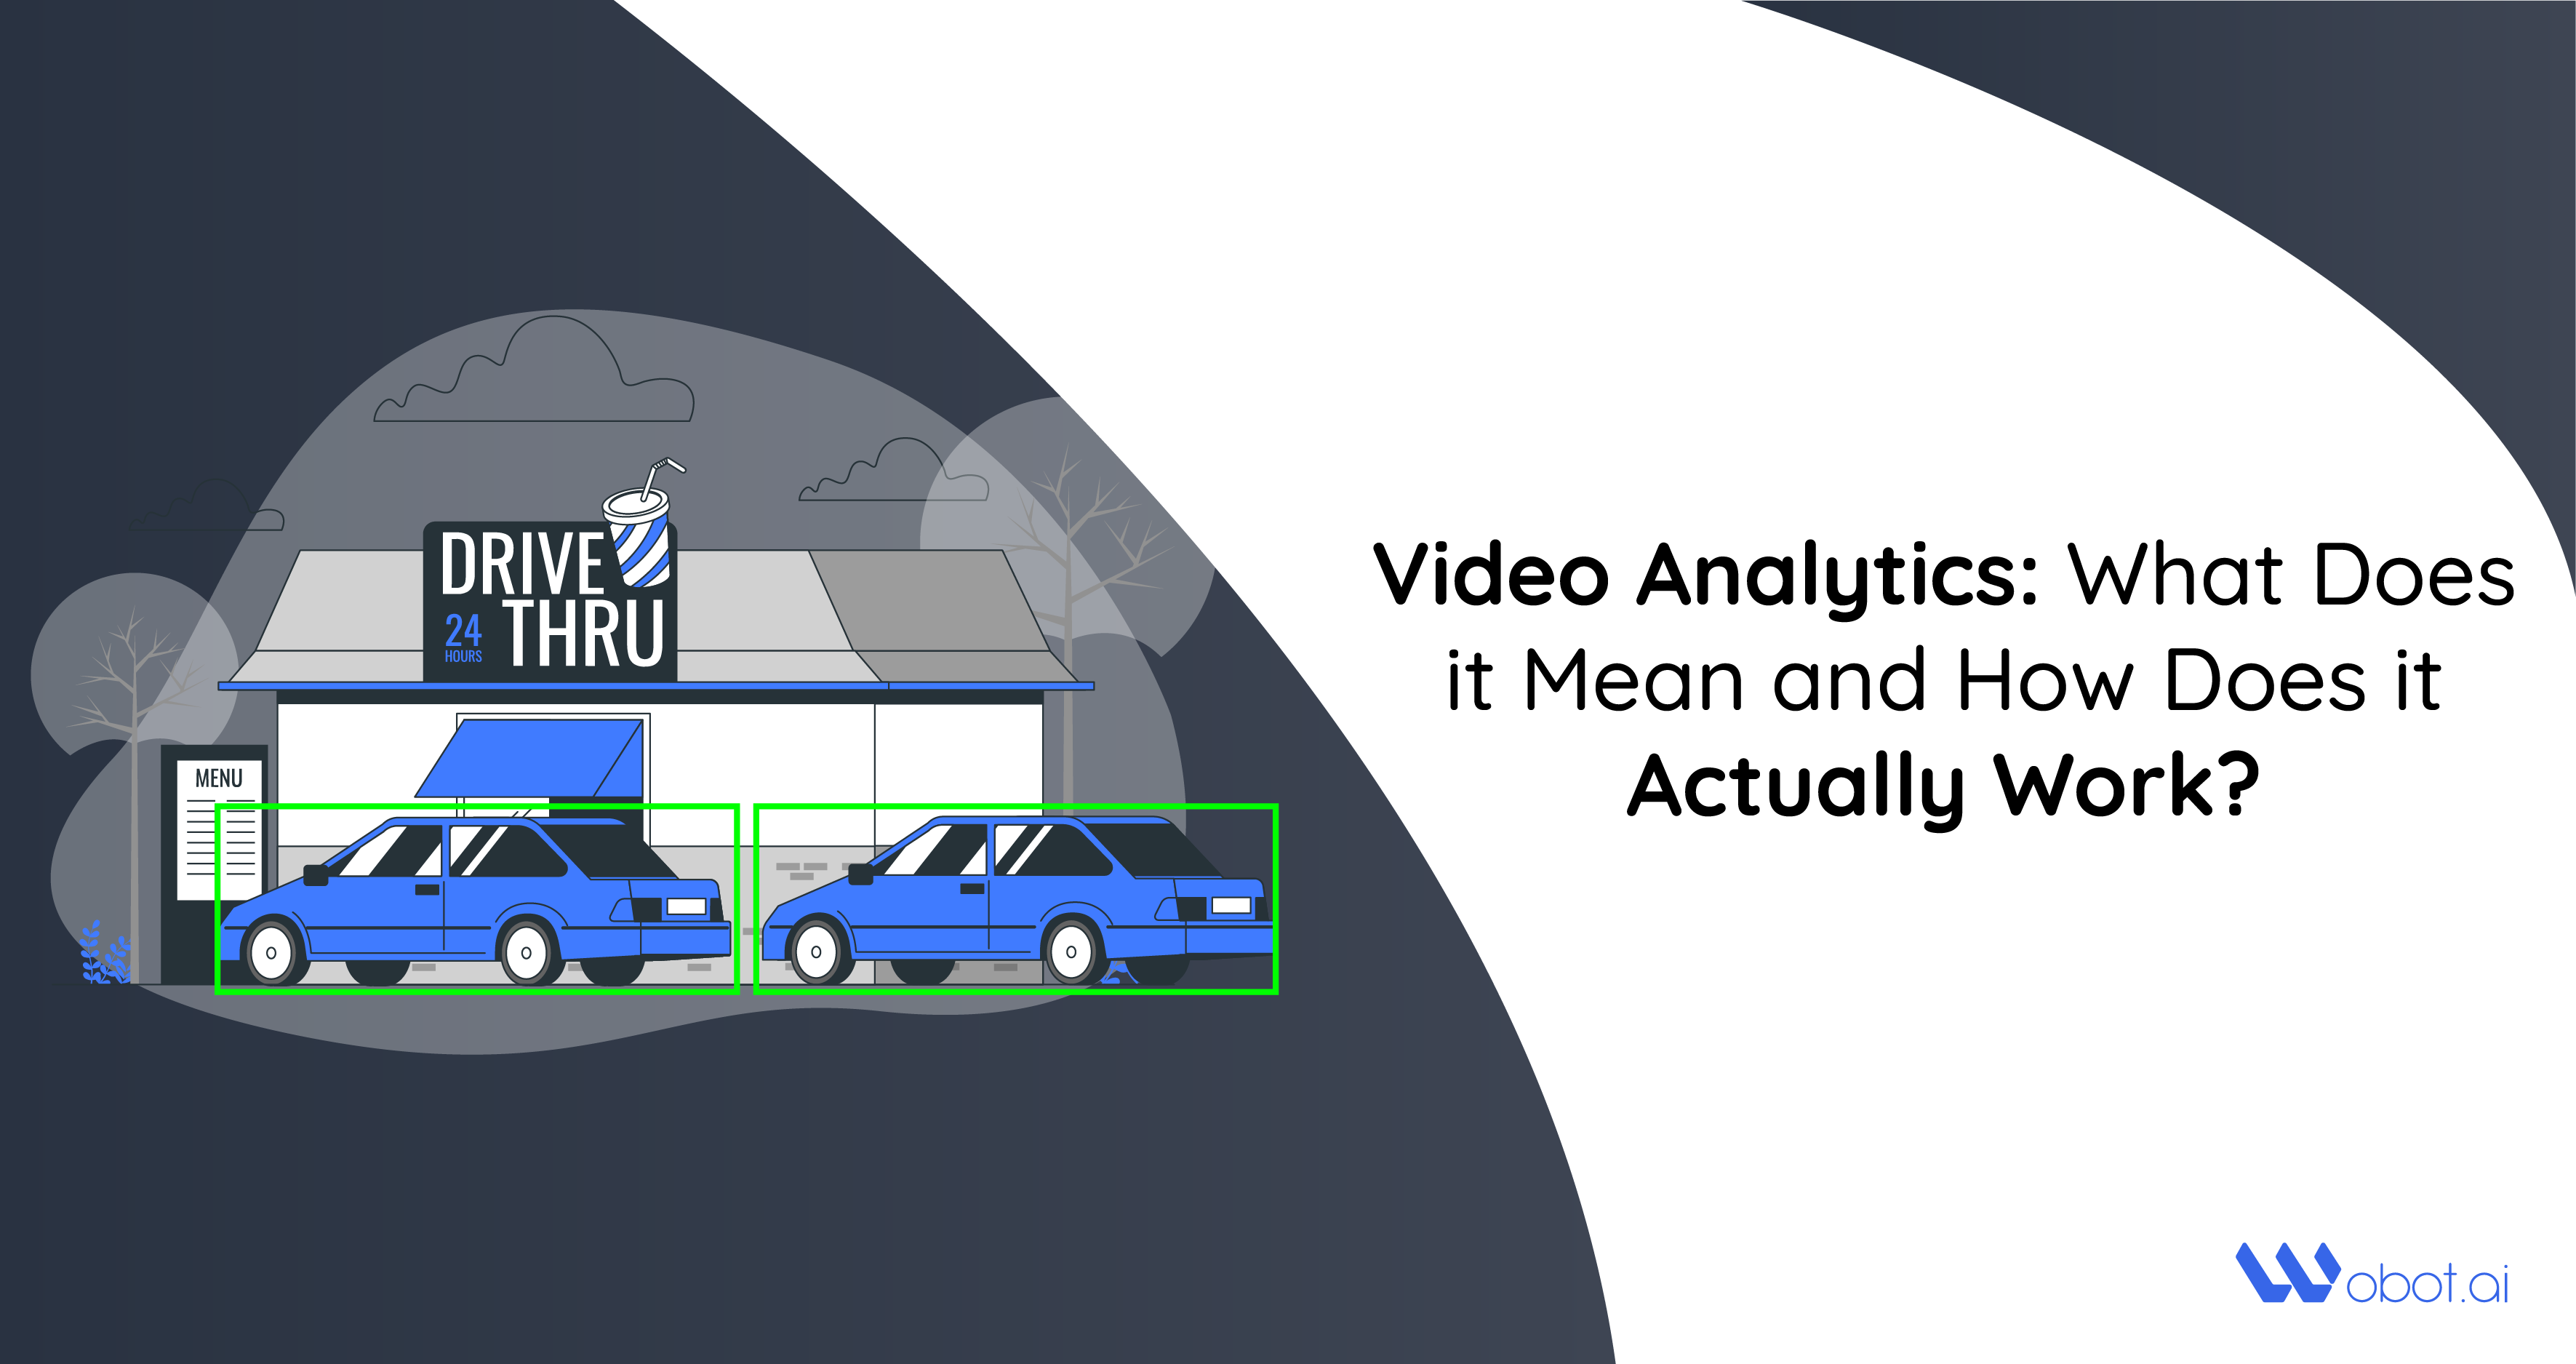 Video Analytics: What Does it Mean and How Does it Actually Work?